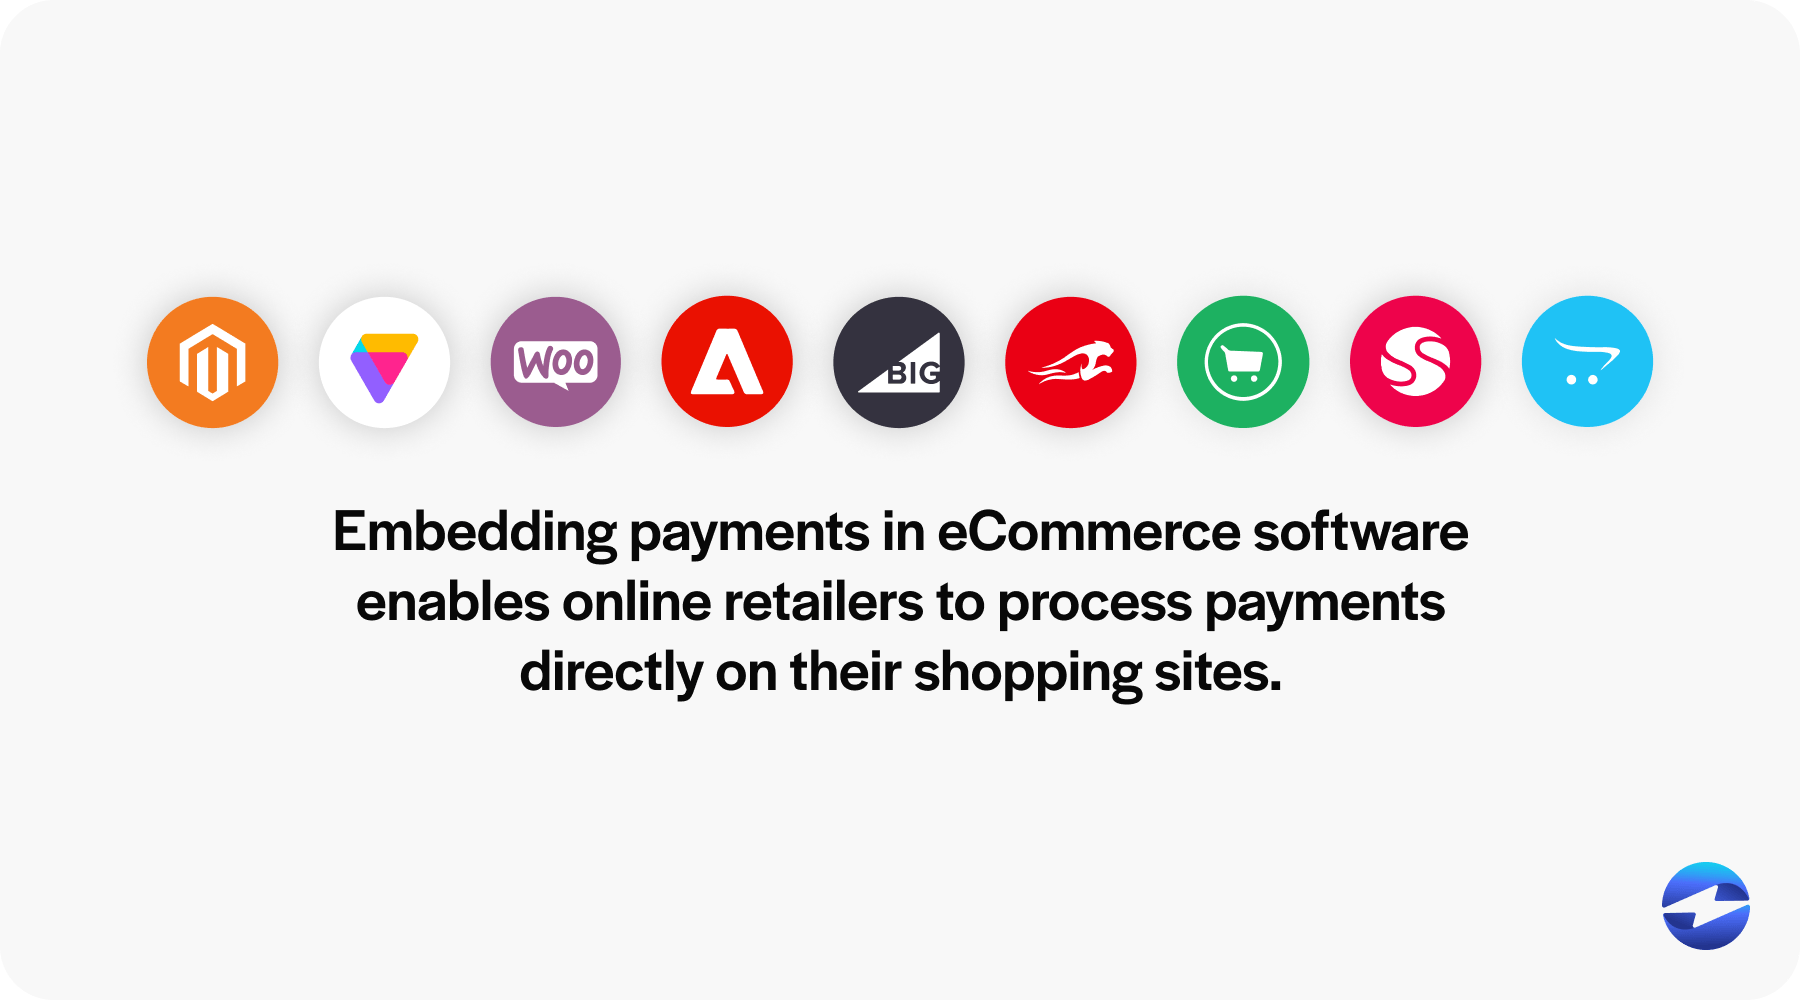 Embedding payments in eCommerce software